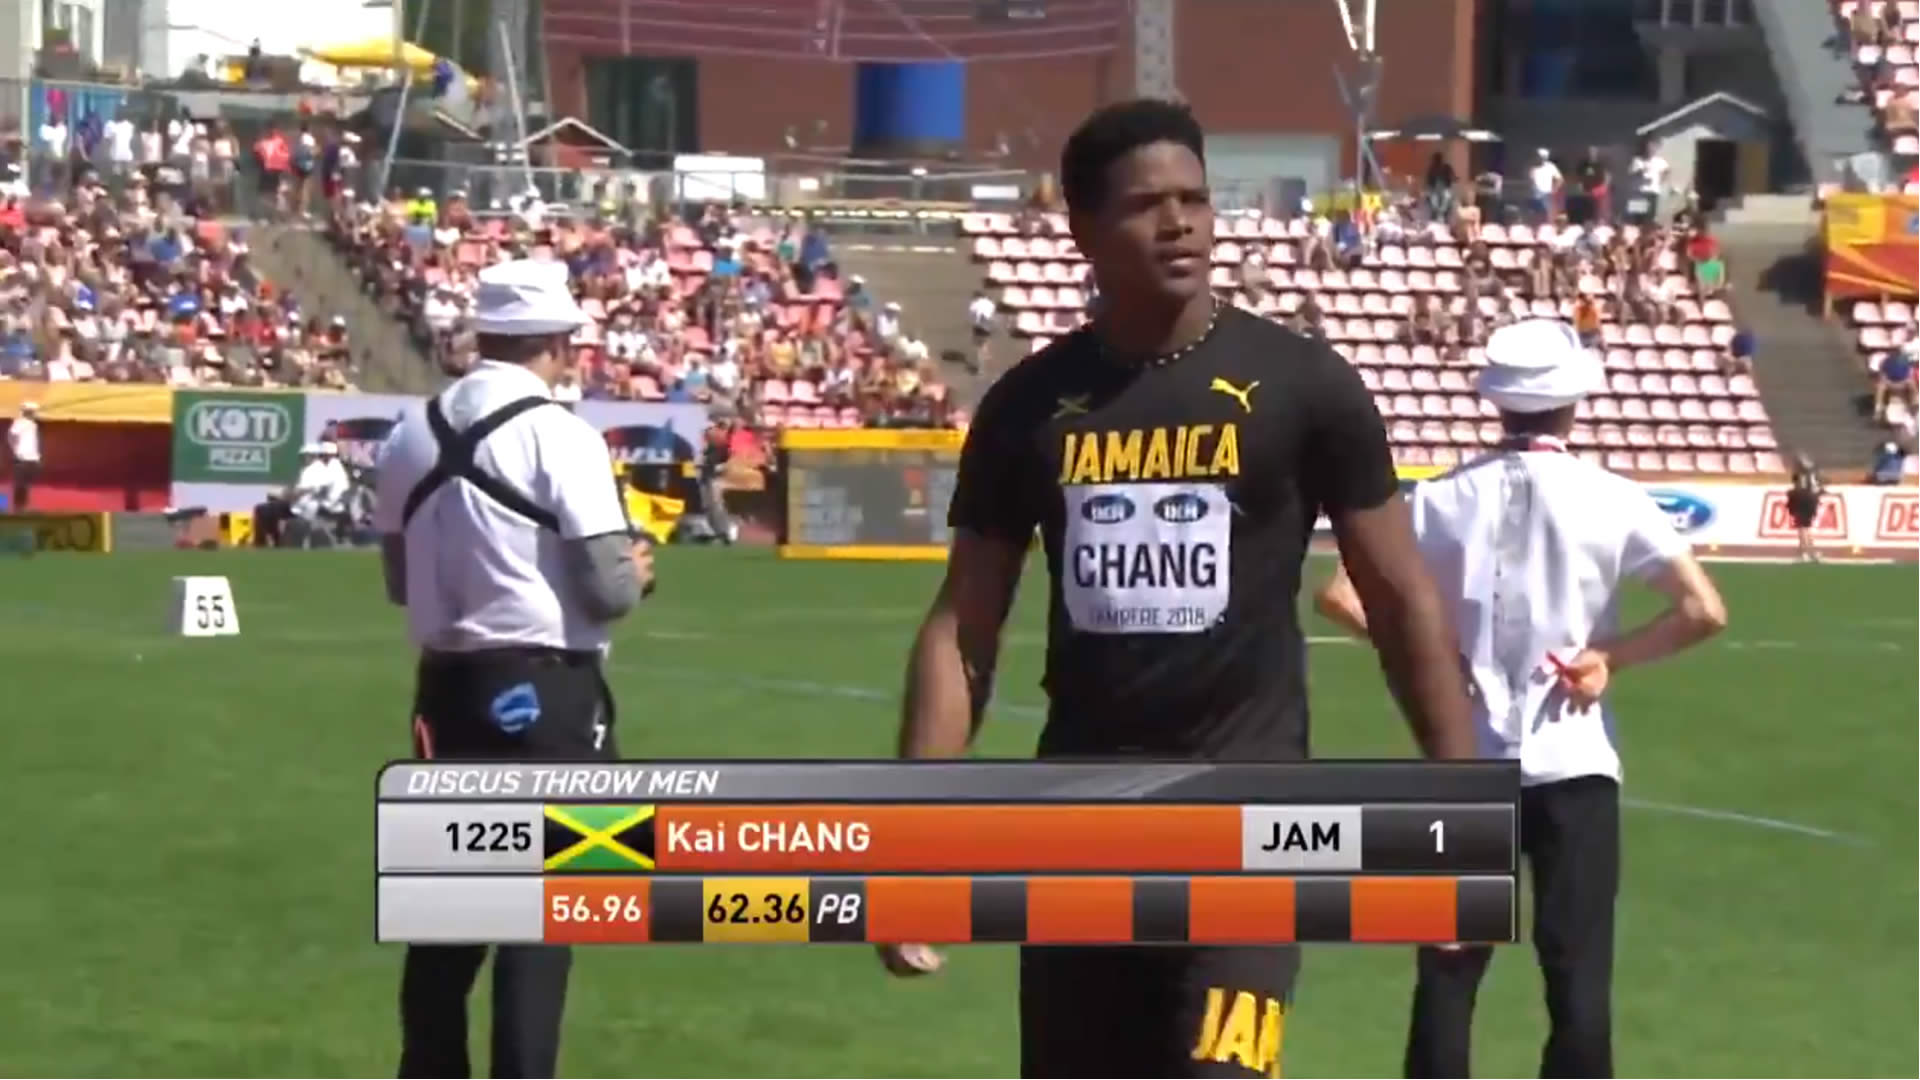 Kai Chang Wins World Under-20 Championships Discus Throw Gold for Jamaica